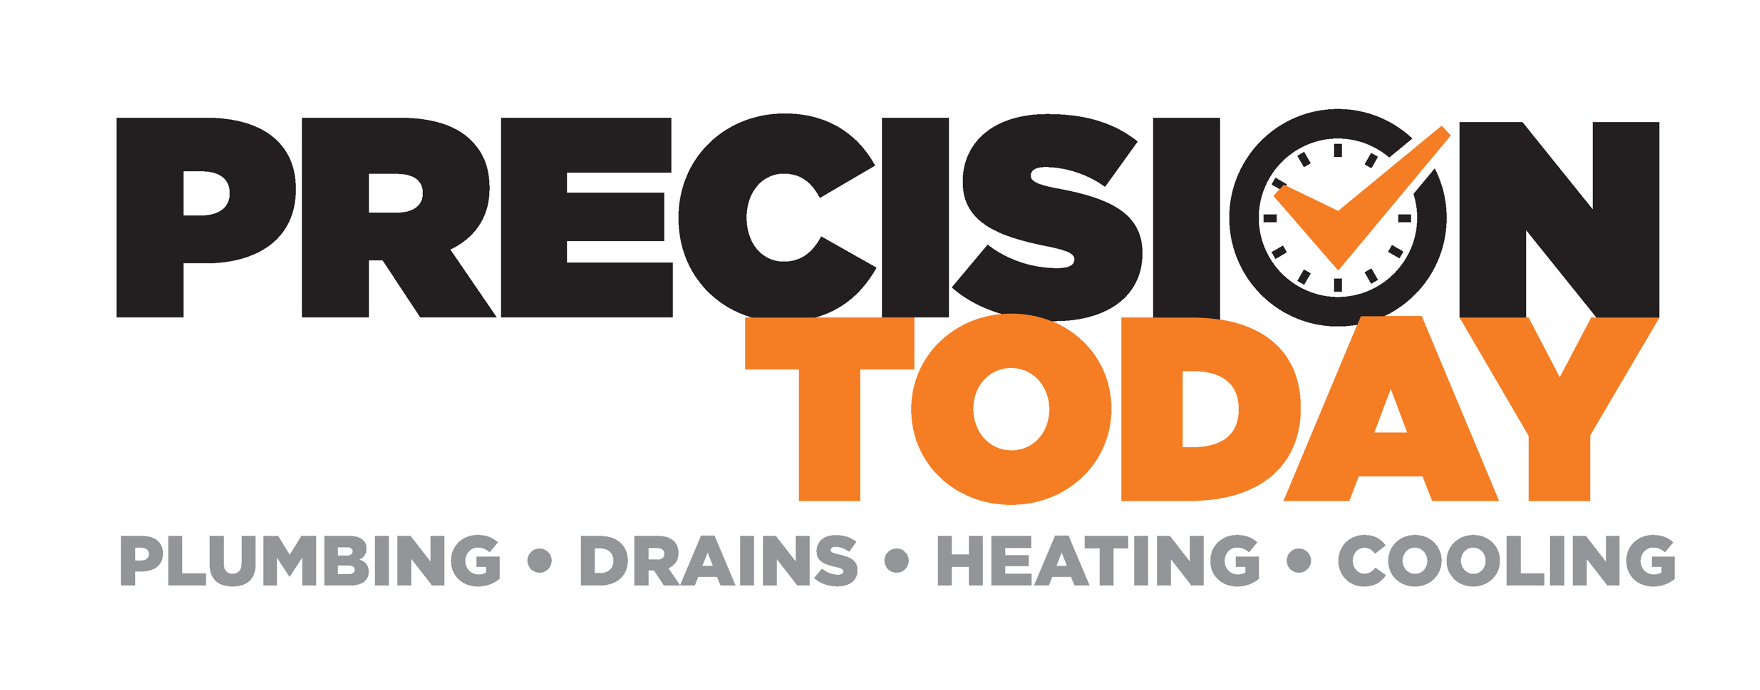 Precision Today Plumbing Heating Cooling Electrical Logo